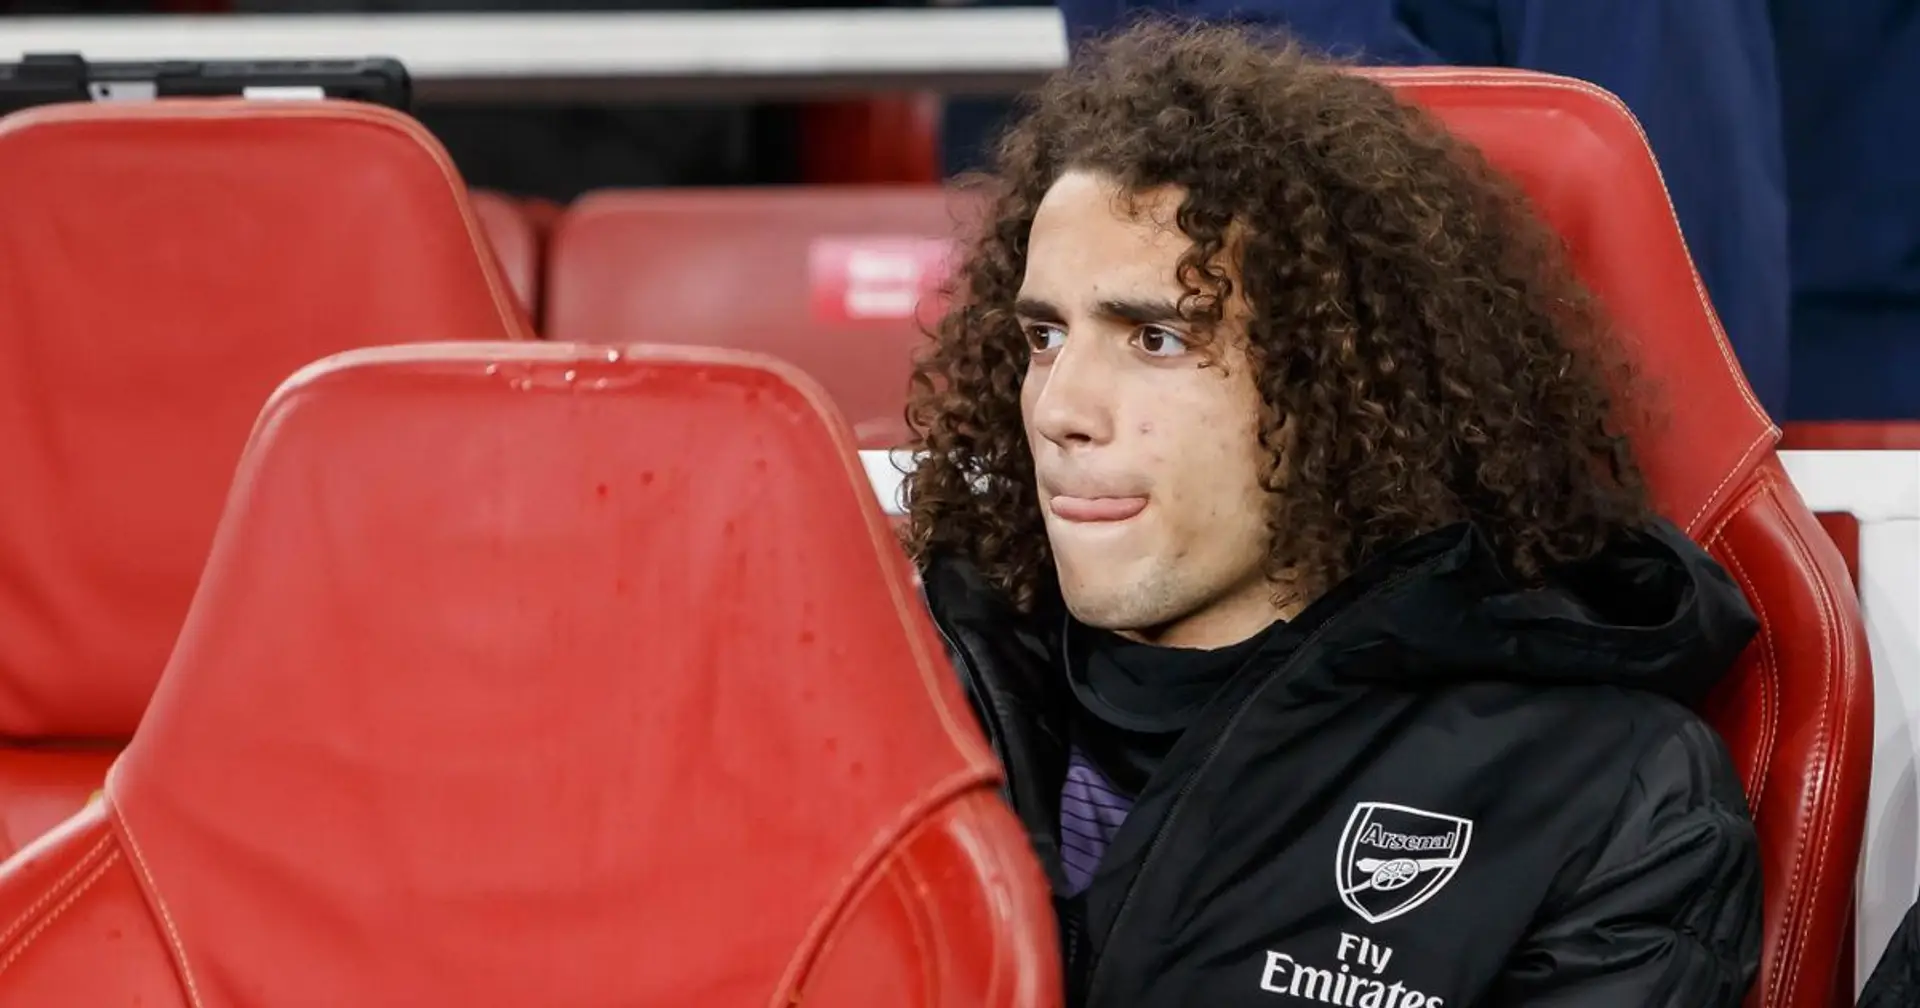 'It's a disservice to Matteo & Arsenal to pretend we need mythical c*nts': Gunners supporter blasts strange Guendouzi narrative